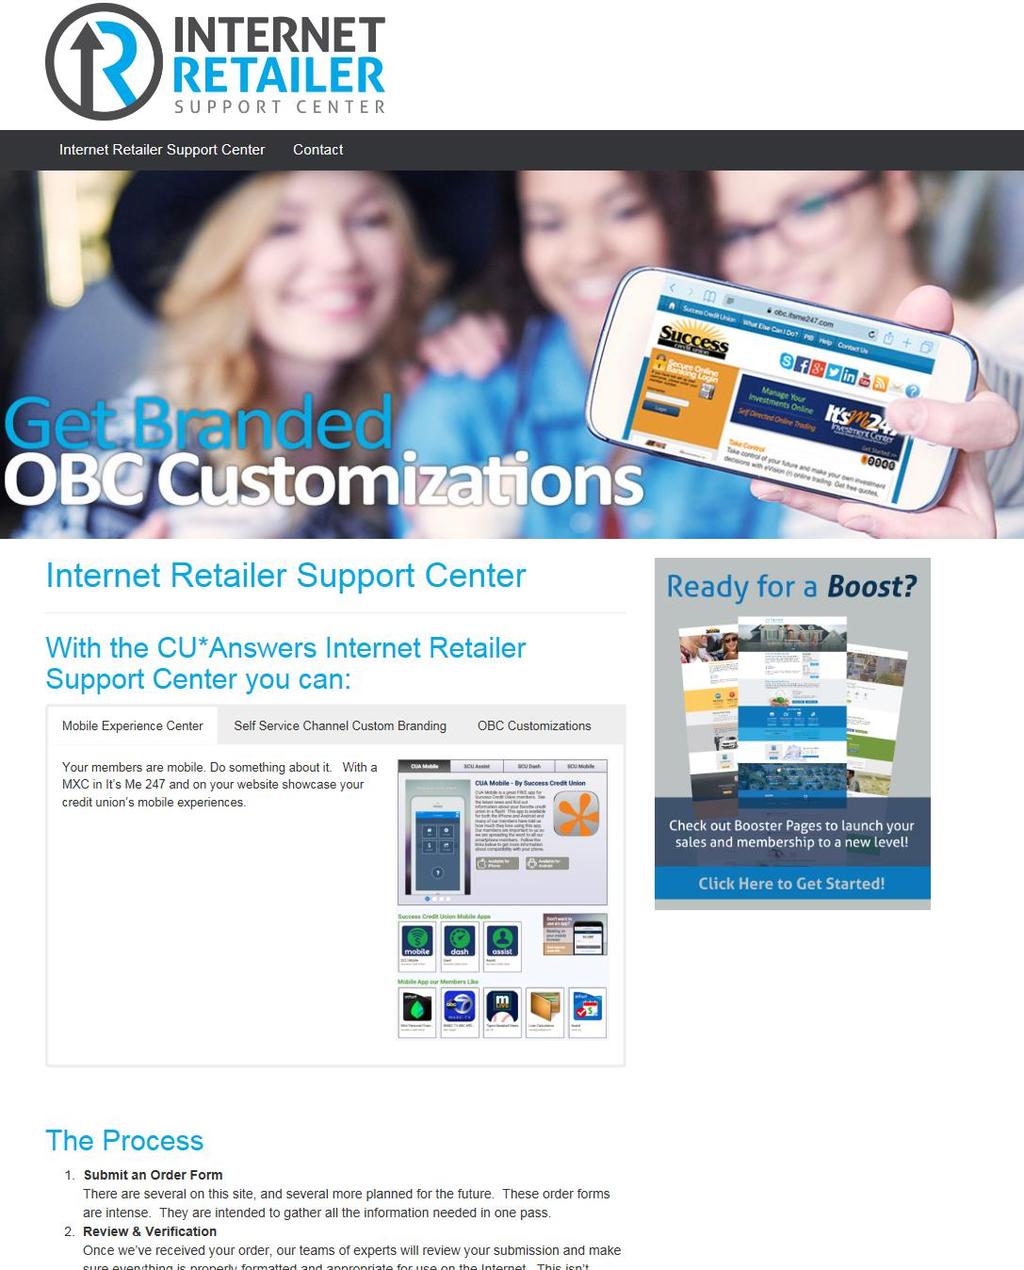 Our First Client Service Department Designed With An Online Storefront THE INTERNET RETAILER SUPPORT CENTER This storefront will eventually combine Classic CU*BASE configurations for virtual member